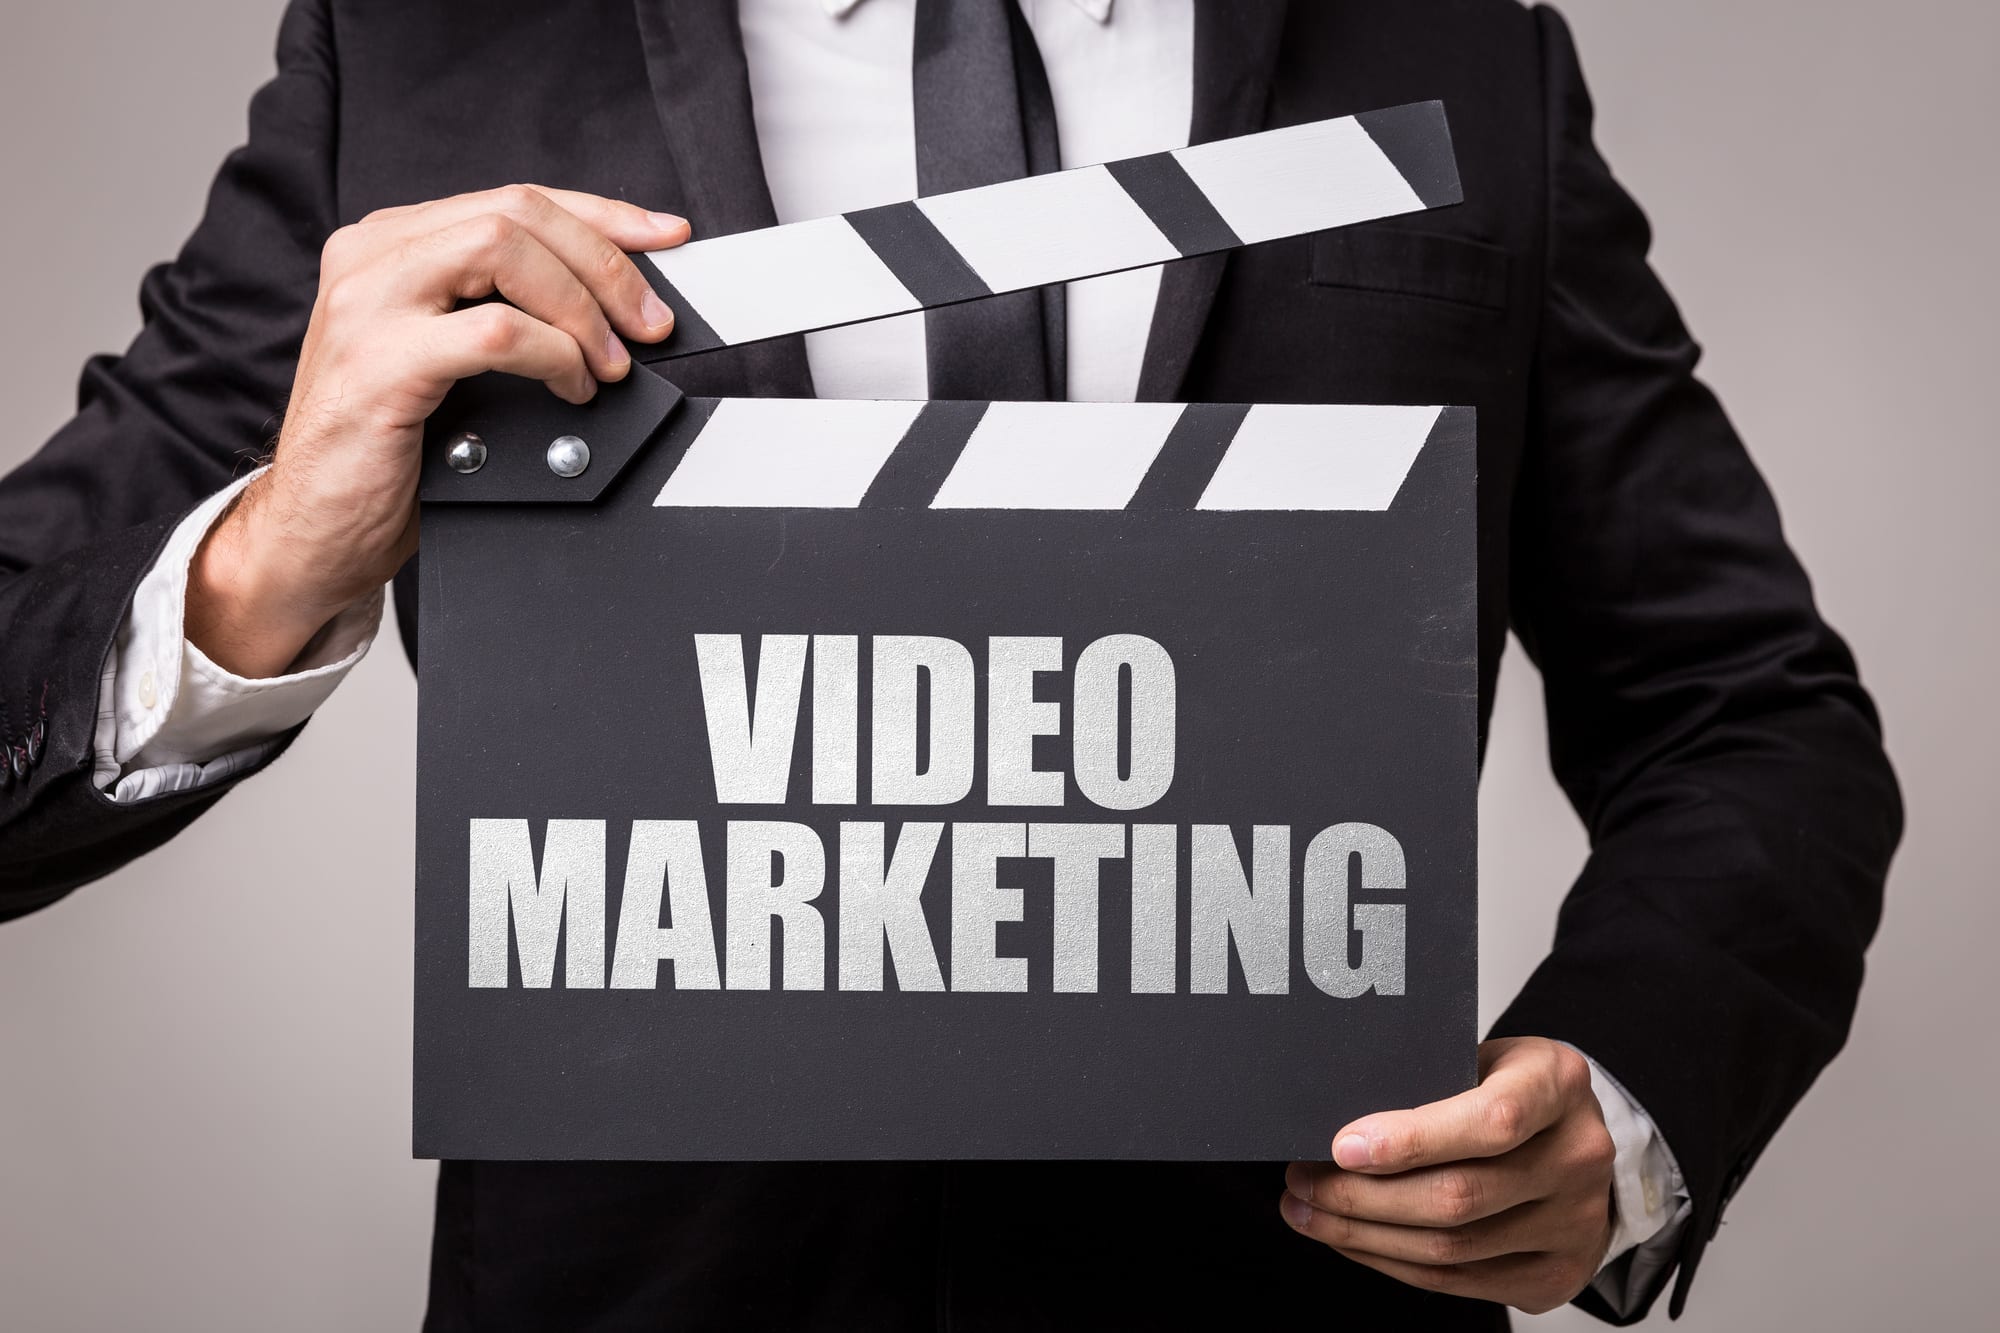 8 Common Video Marketing Mistakes and How to Avoid Them